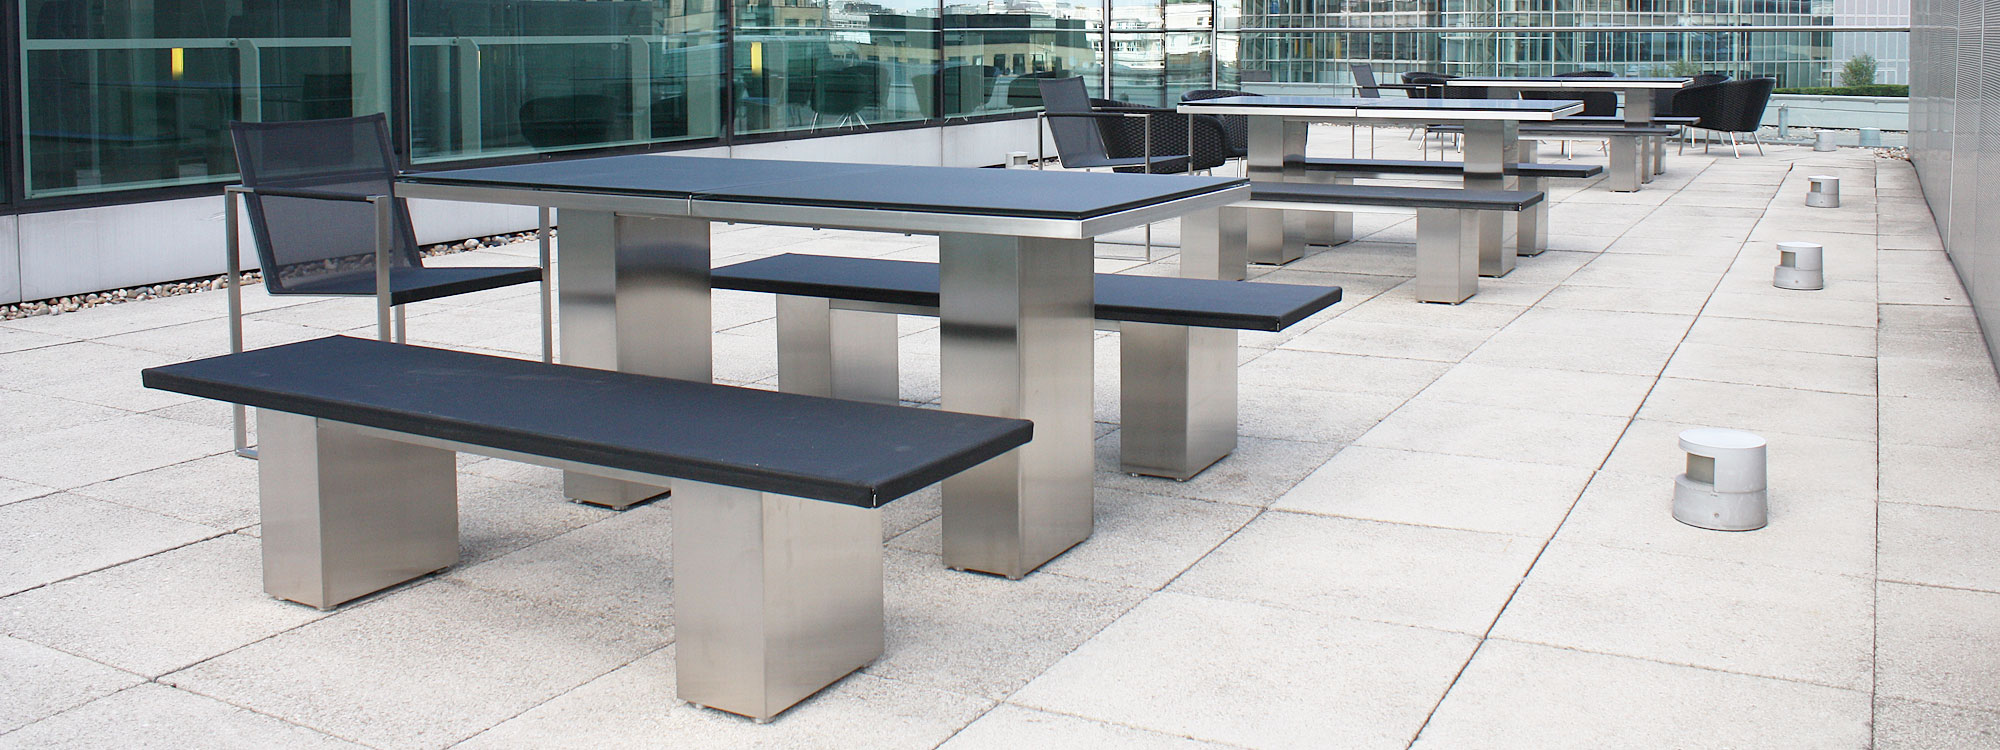 City of London outdoor furniture installation of FueraDentro Doble table and benches